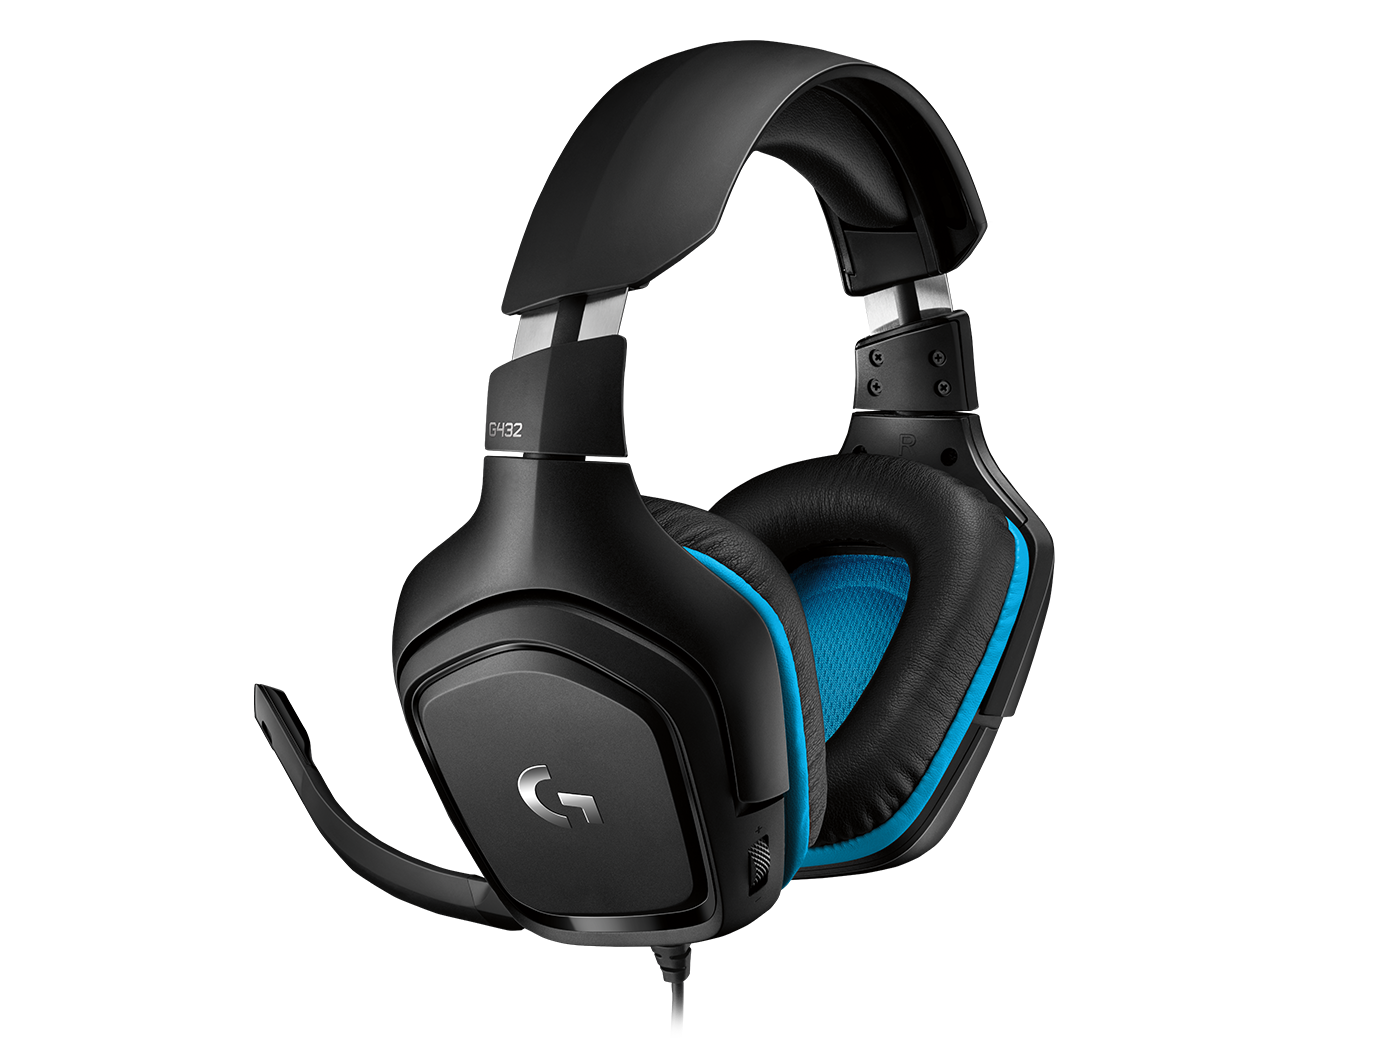 "Logitech G432 Gaming Headset Front View"